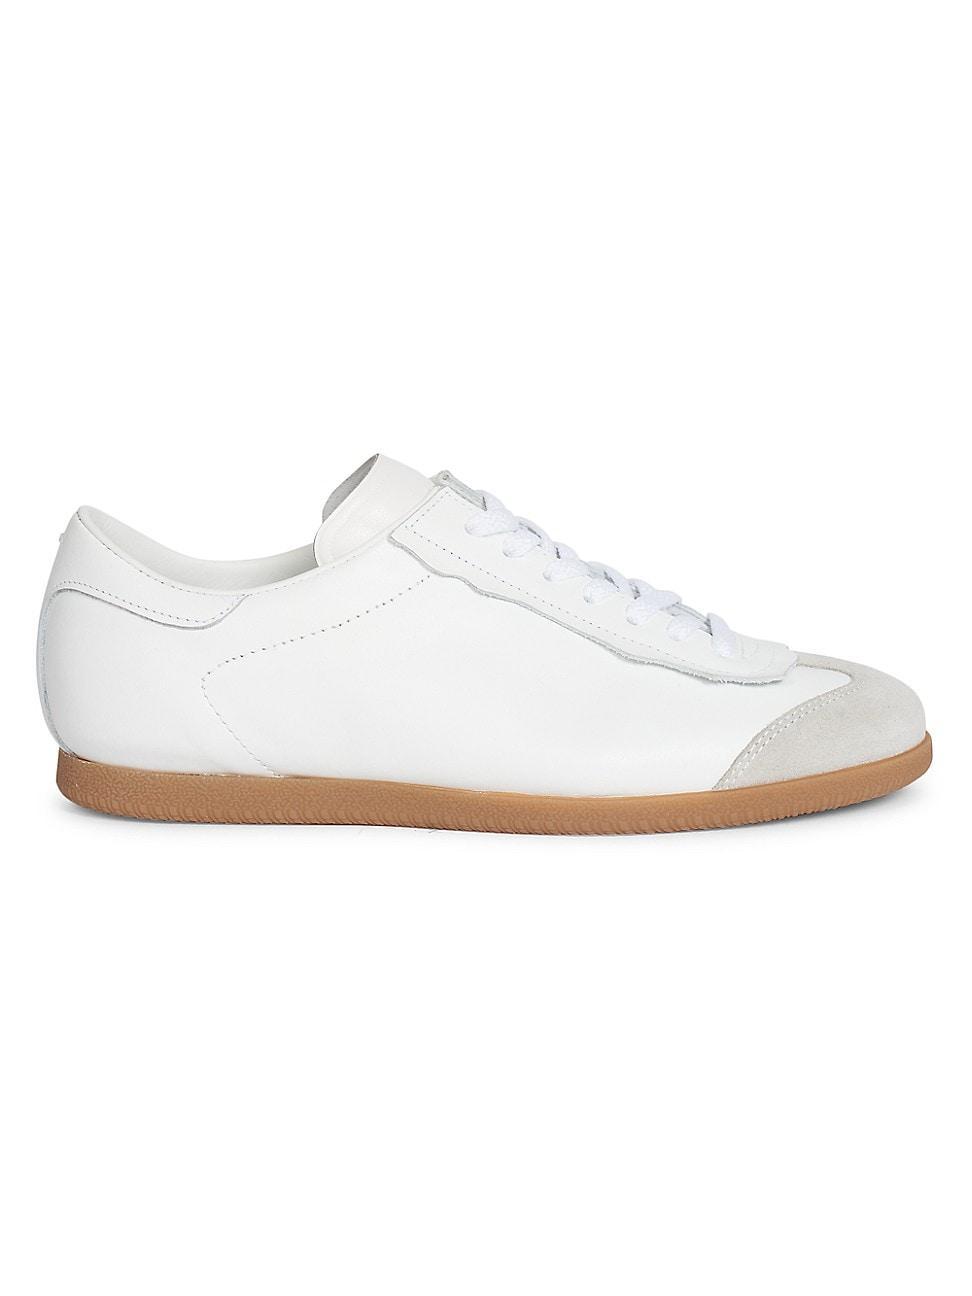 Womens Feather Light Leather & Suede Sneakers Product Image